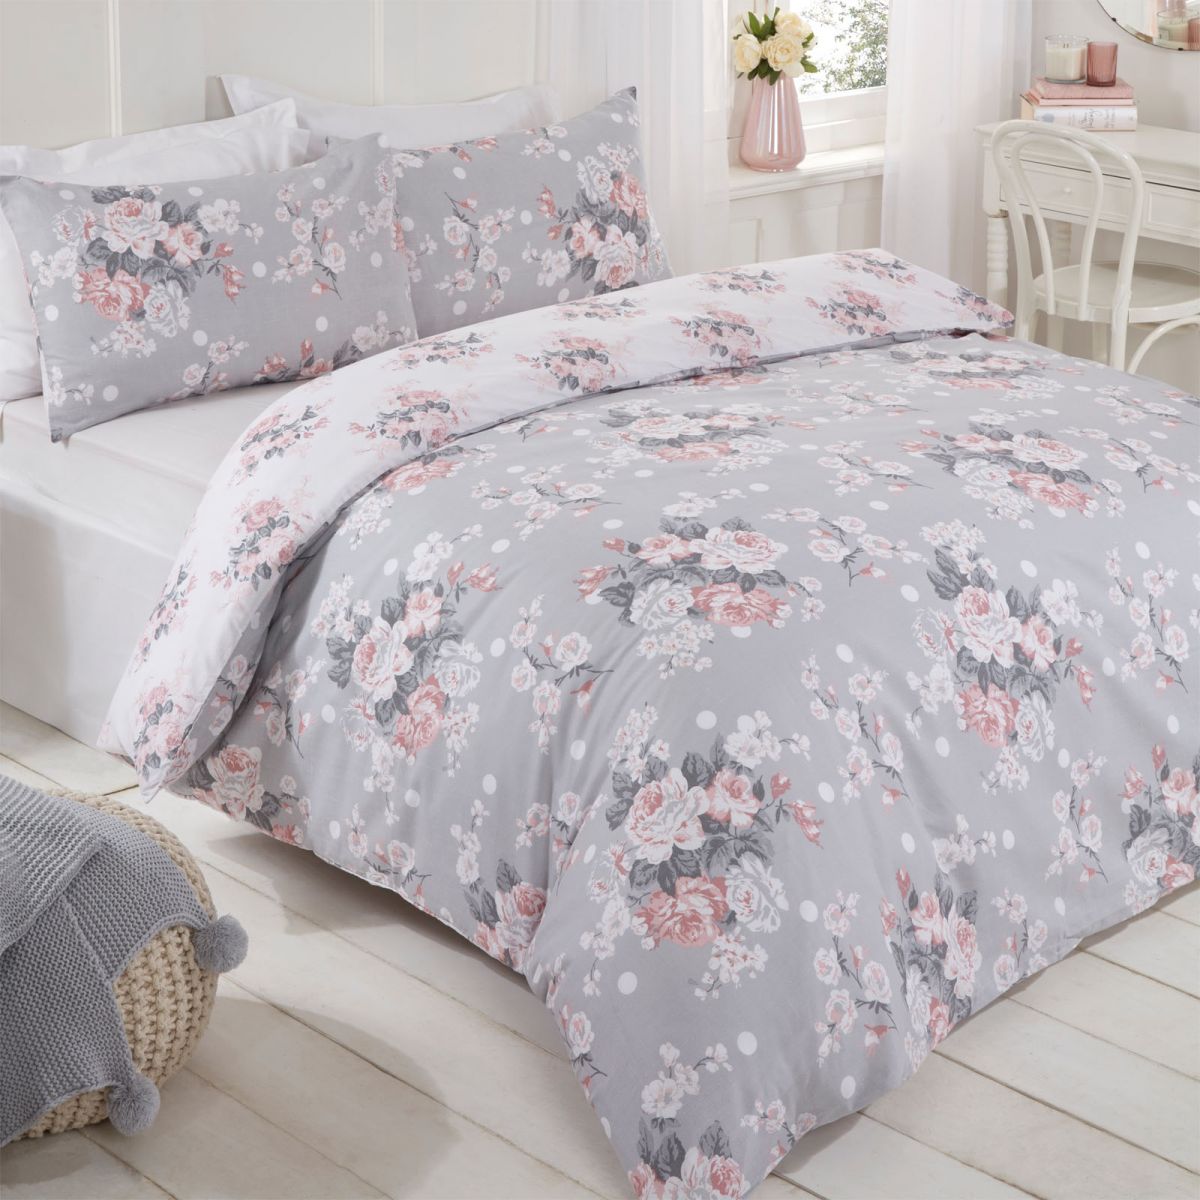 GREY PINK ROSE FLORAL KING SIZE DUVET COMFORTER COVER & PENCIL PLEAT CURTAINS 